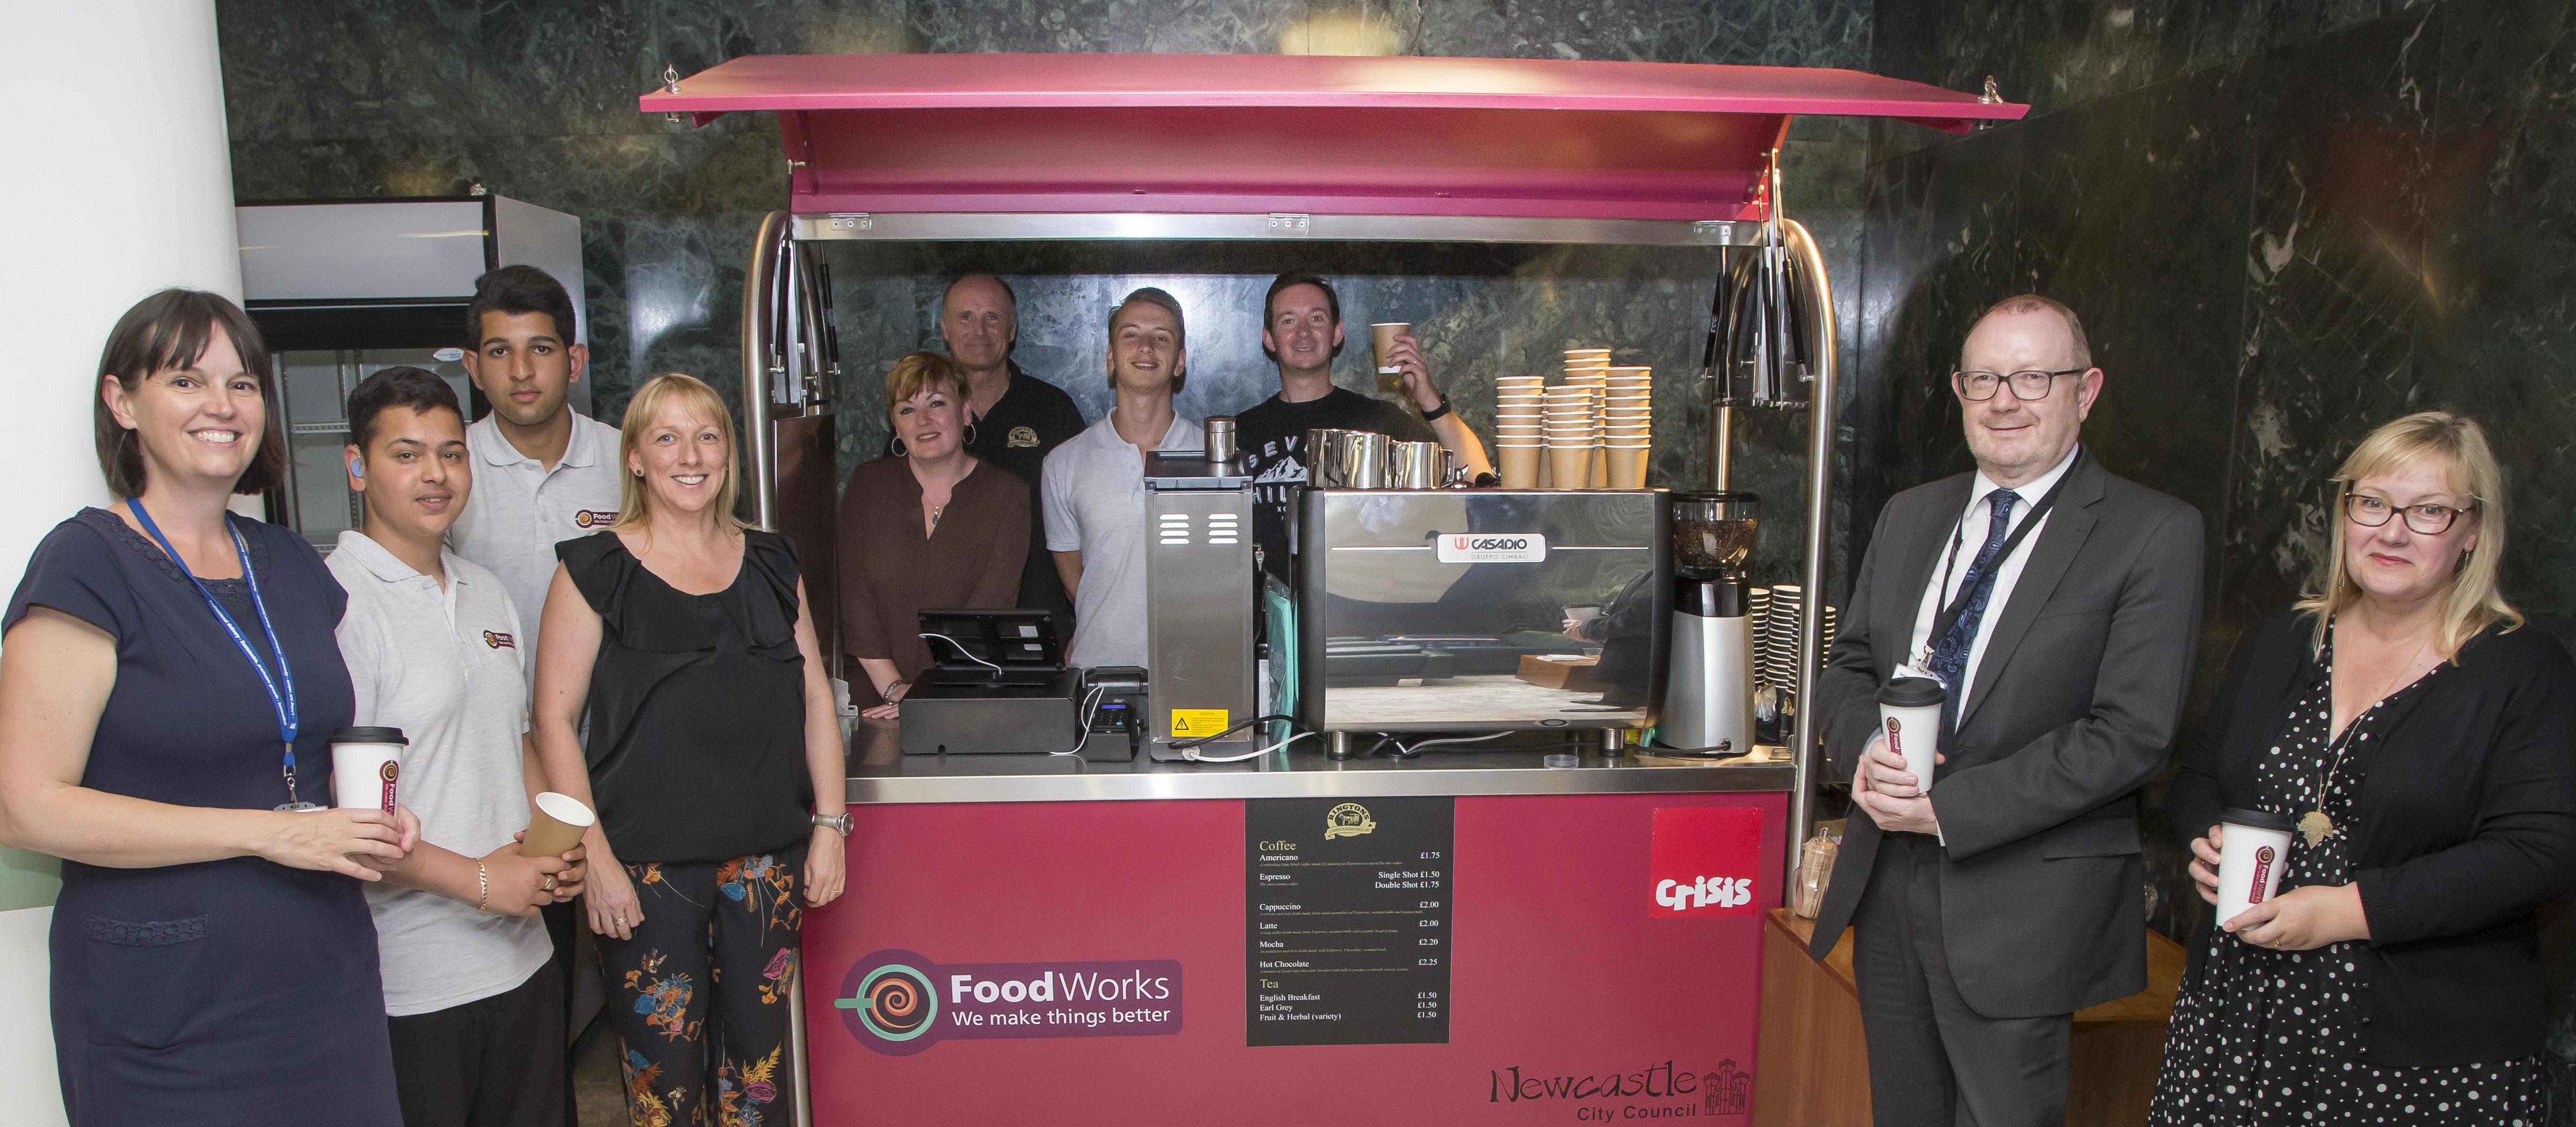 FoodWorks staff and coffee cart